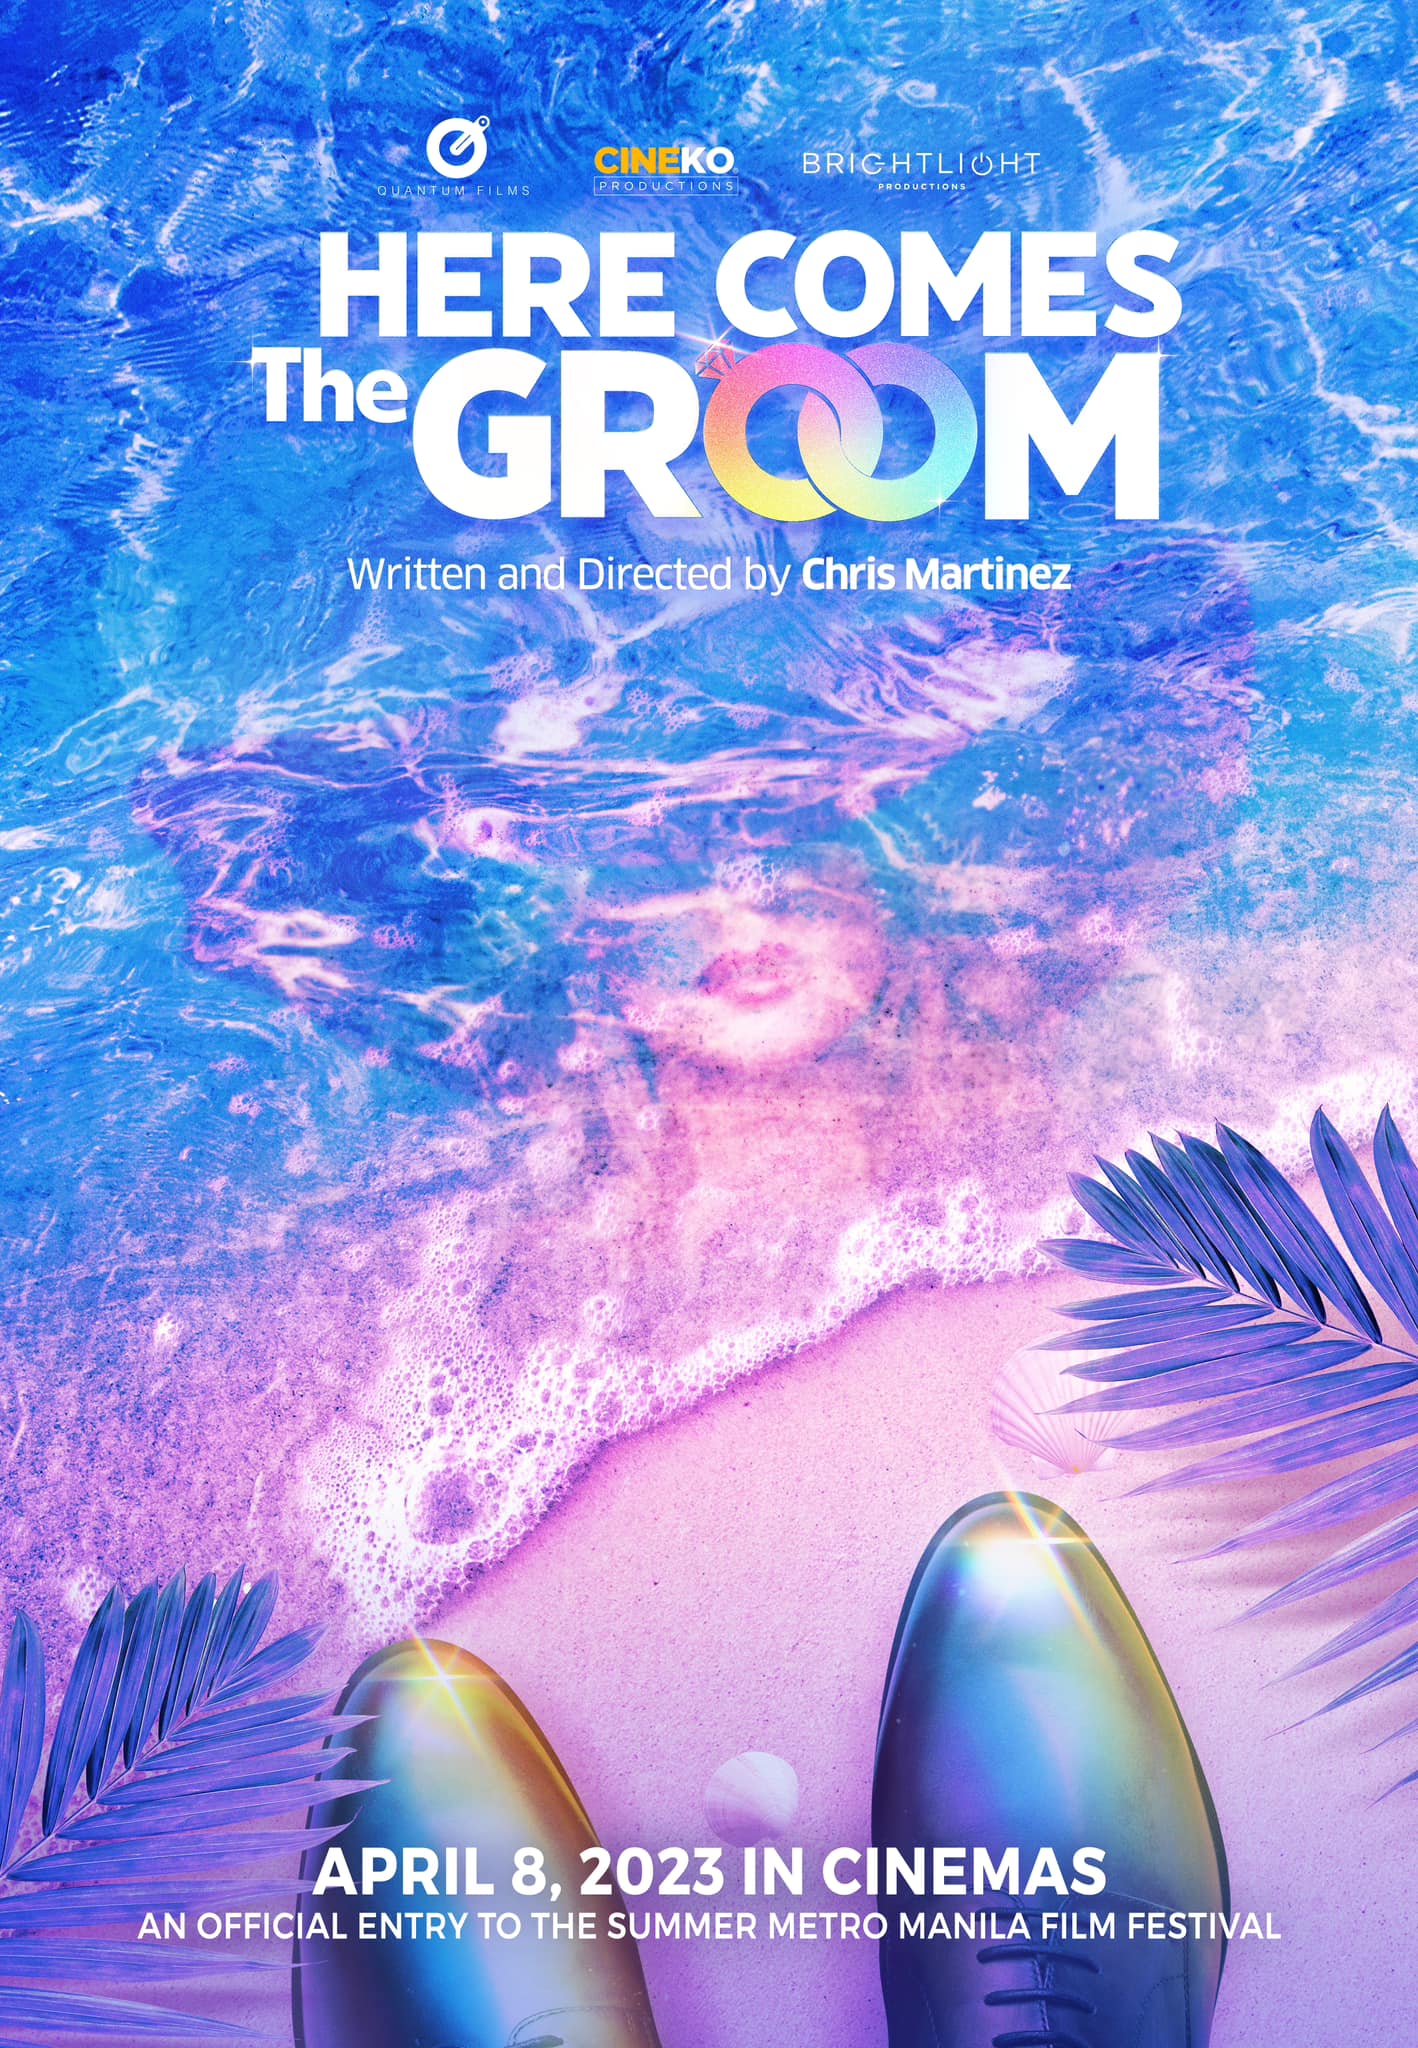 Here Comes The Groom film poster MMFF